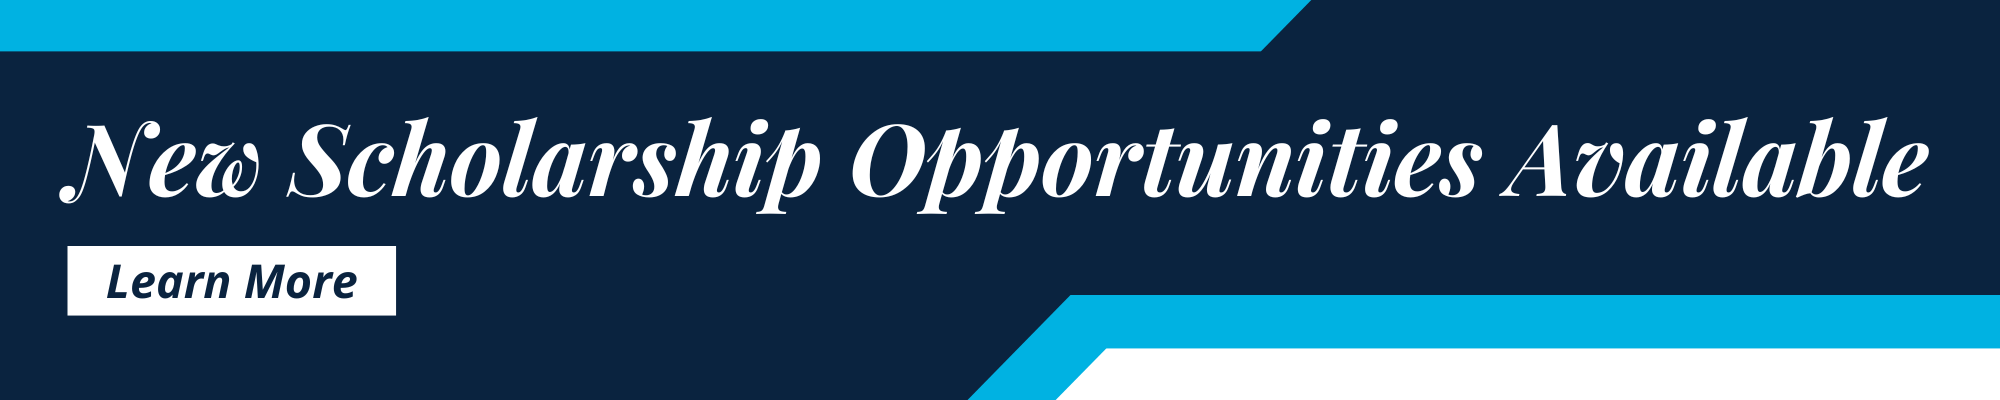 Dark blue graphic with text New Scholarship opportunities available, learn more